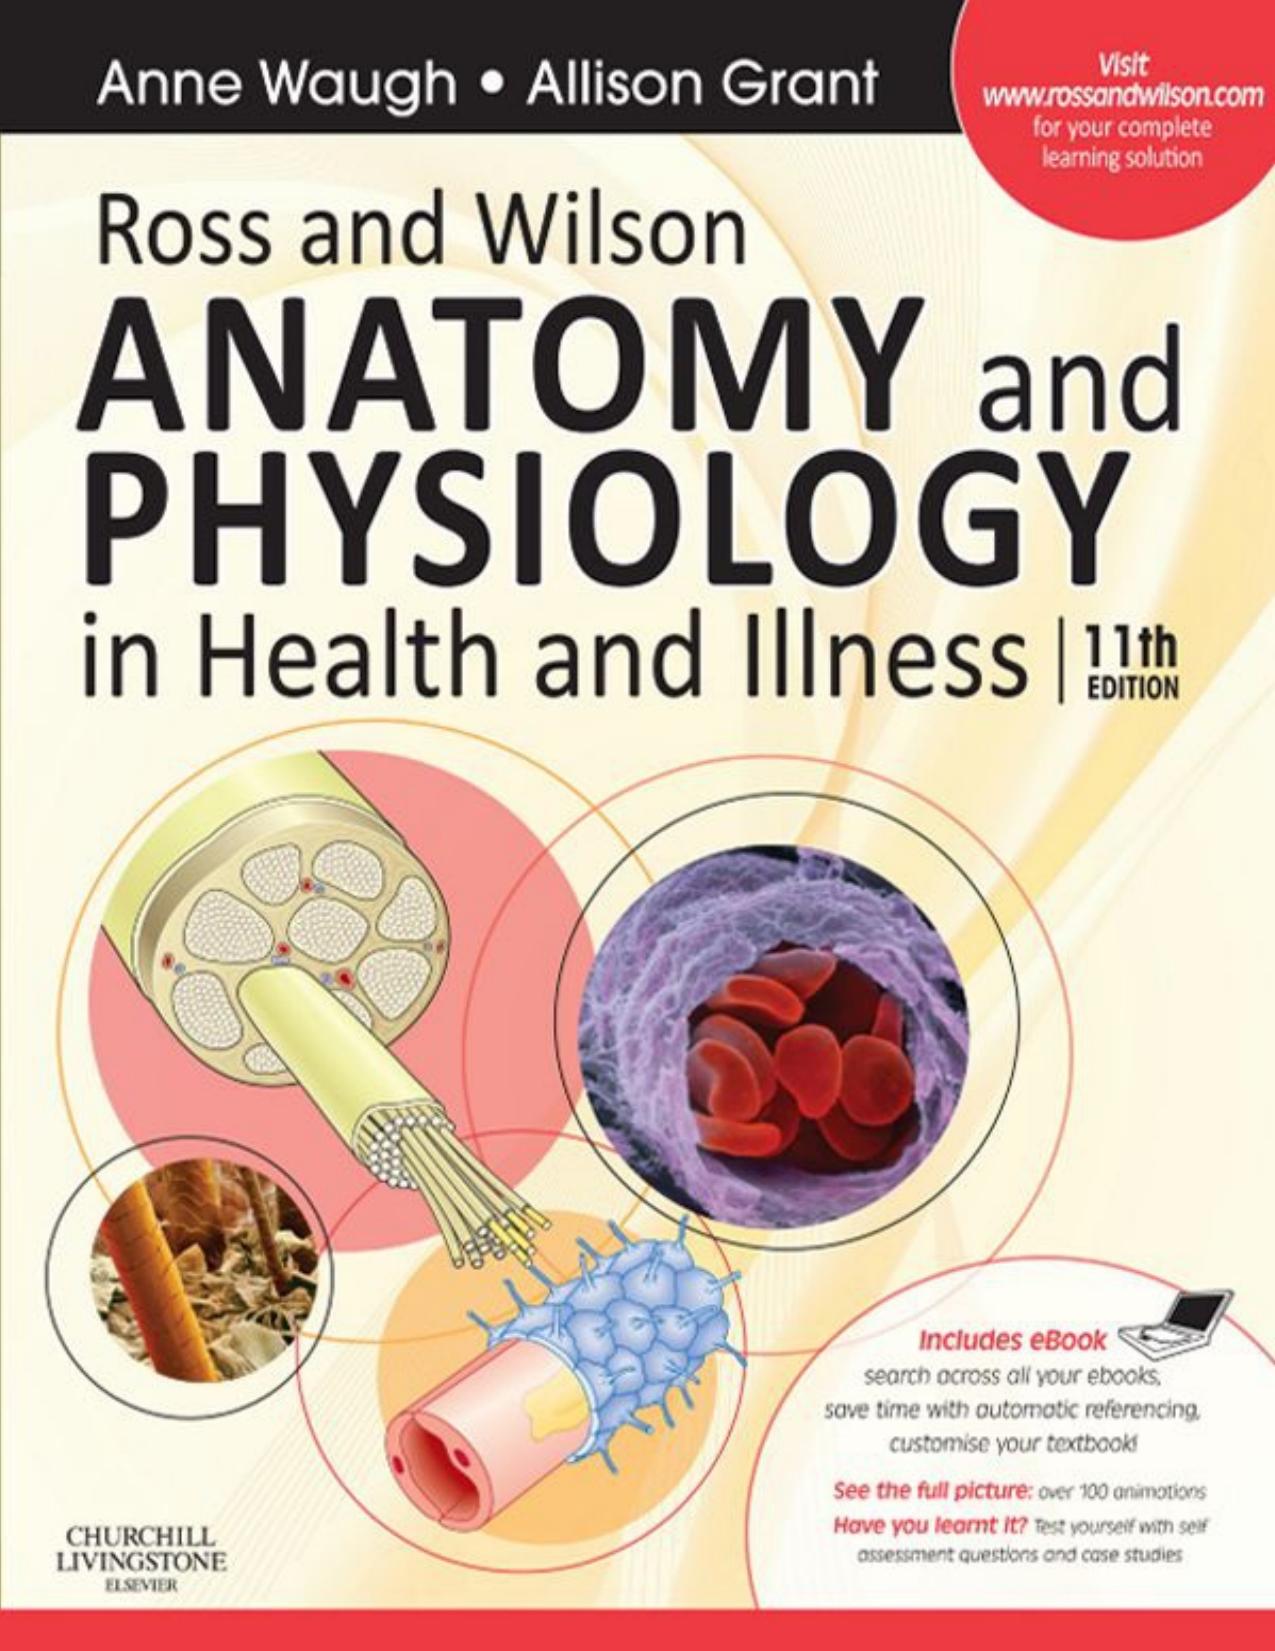 Ross and Wilson ANATOMY and PHYSIOLOGY in Health and Illness 2010